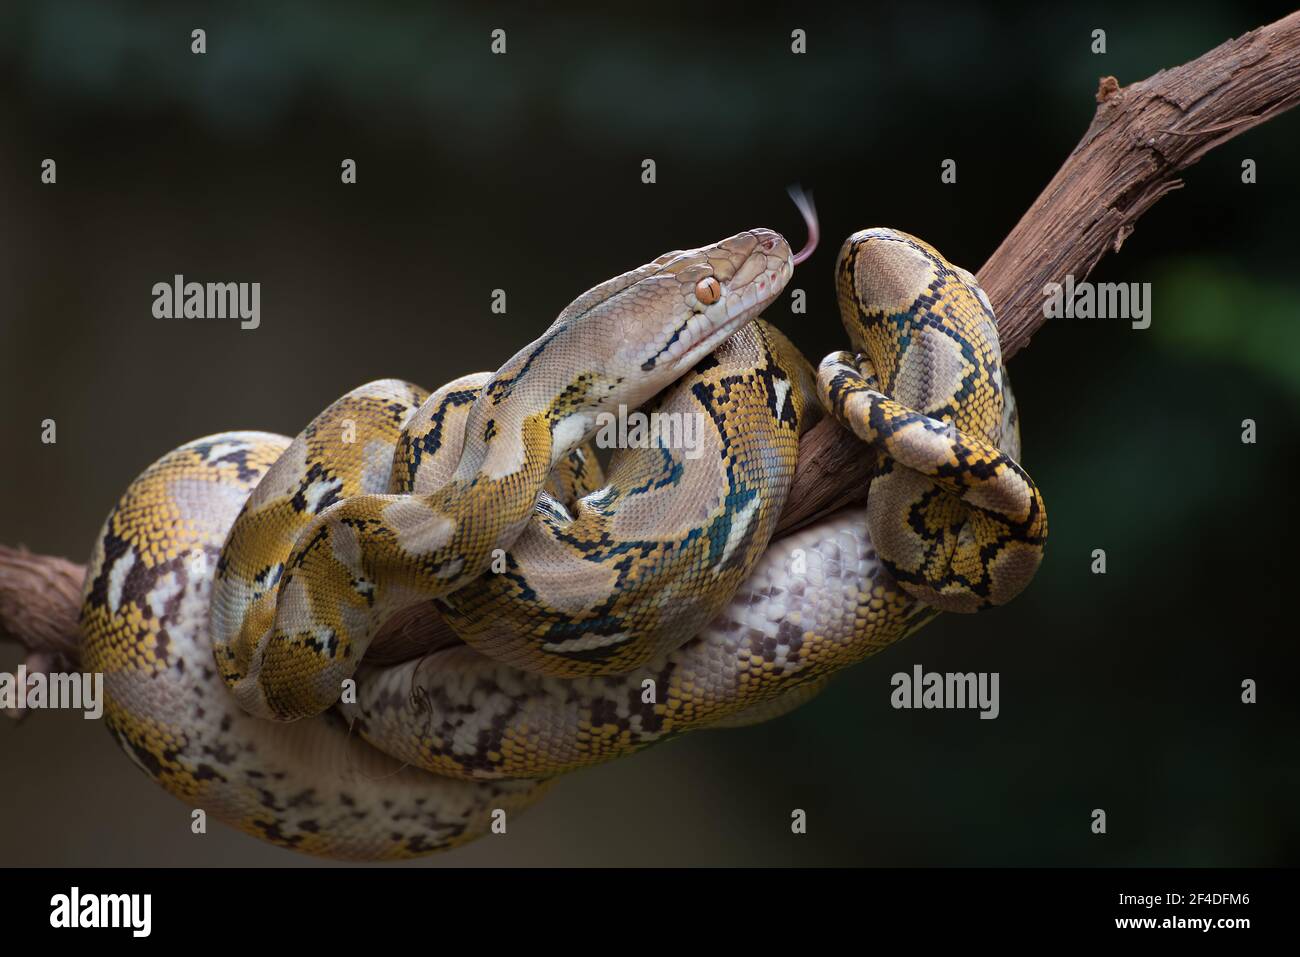 Reticulated python coiled around a tree branch, Indonesia Stock Photo